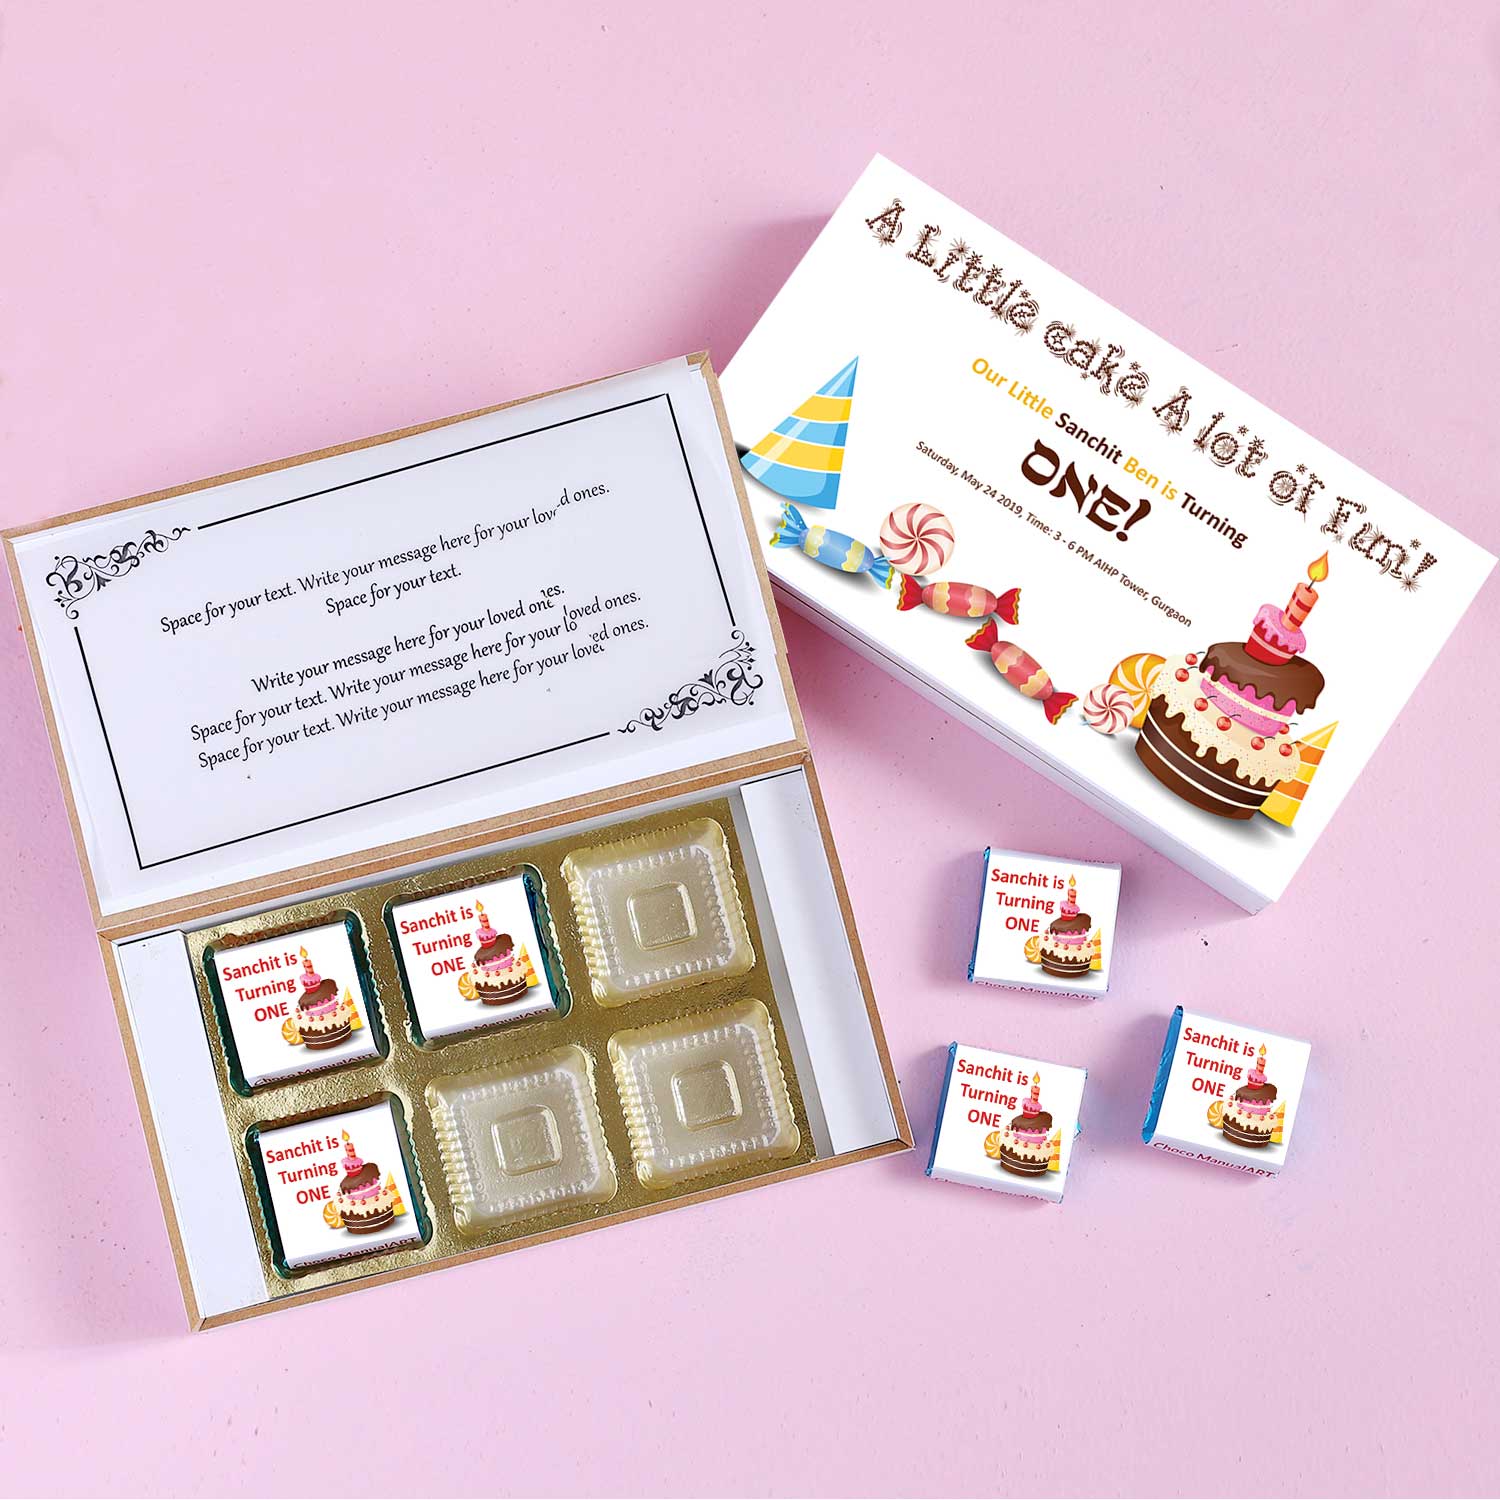 A little cake a lot of fun customised birthday invitation .CUSTOMIZED BIRTHDAY INVITATION A LITTLE CAKE A LOT OF FUN PRINTED GIFT BOX   